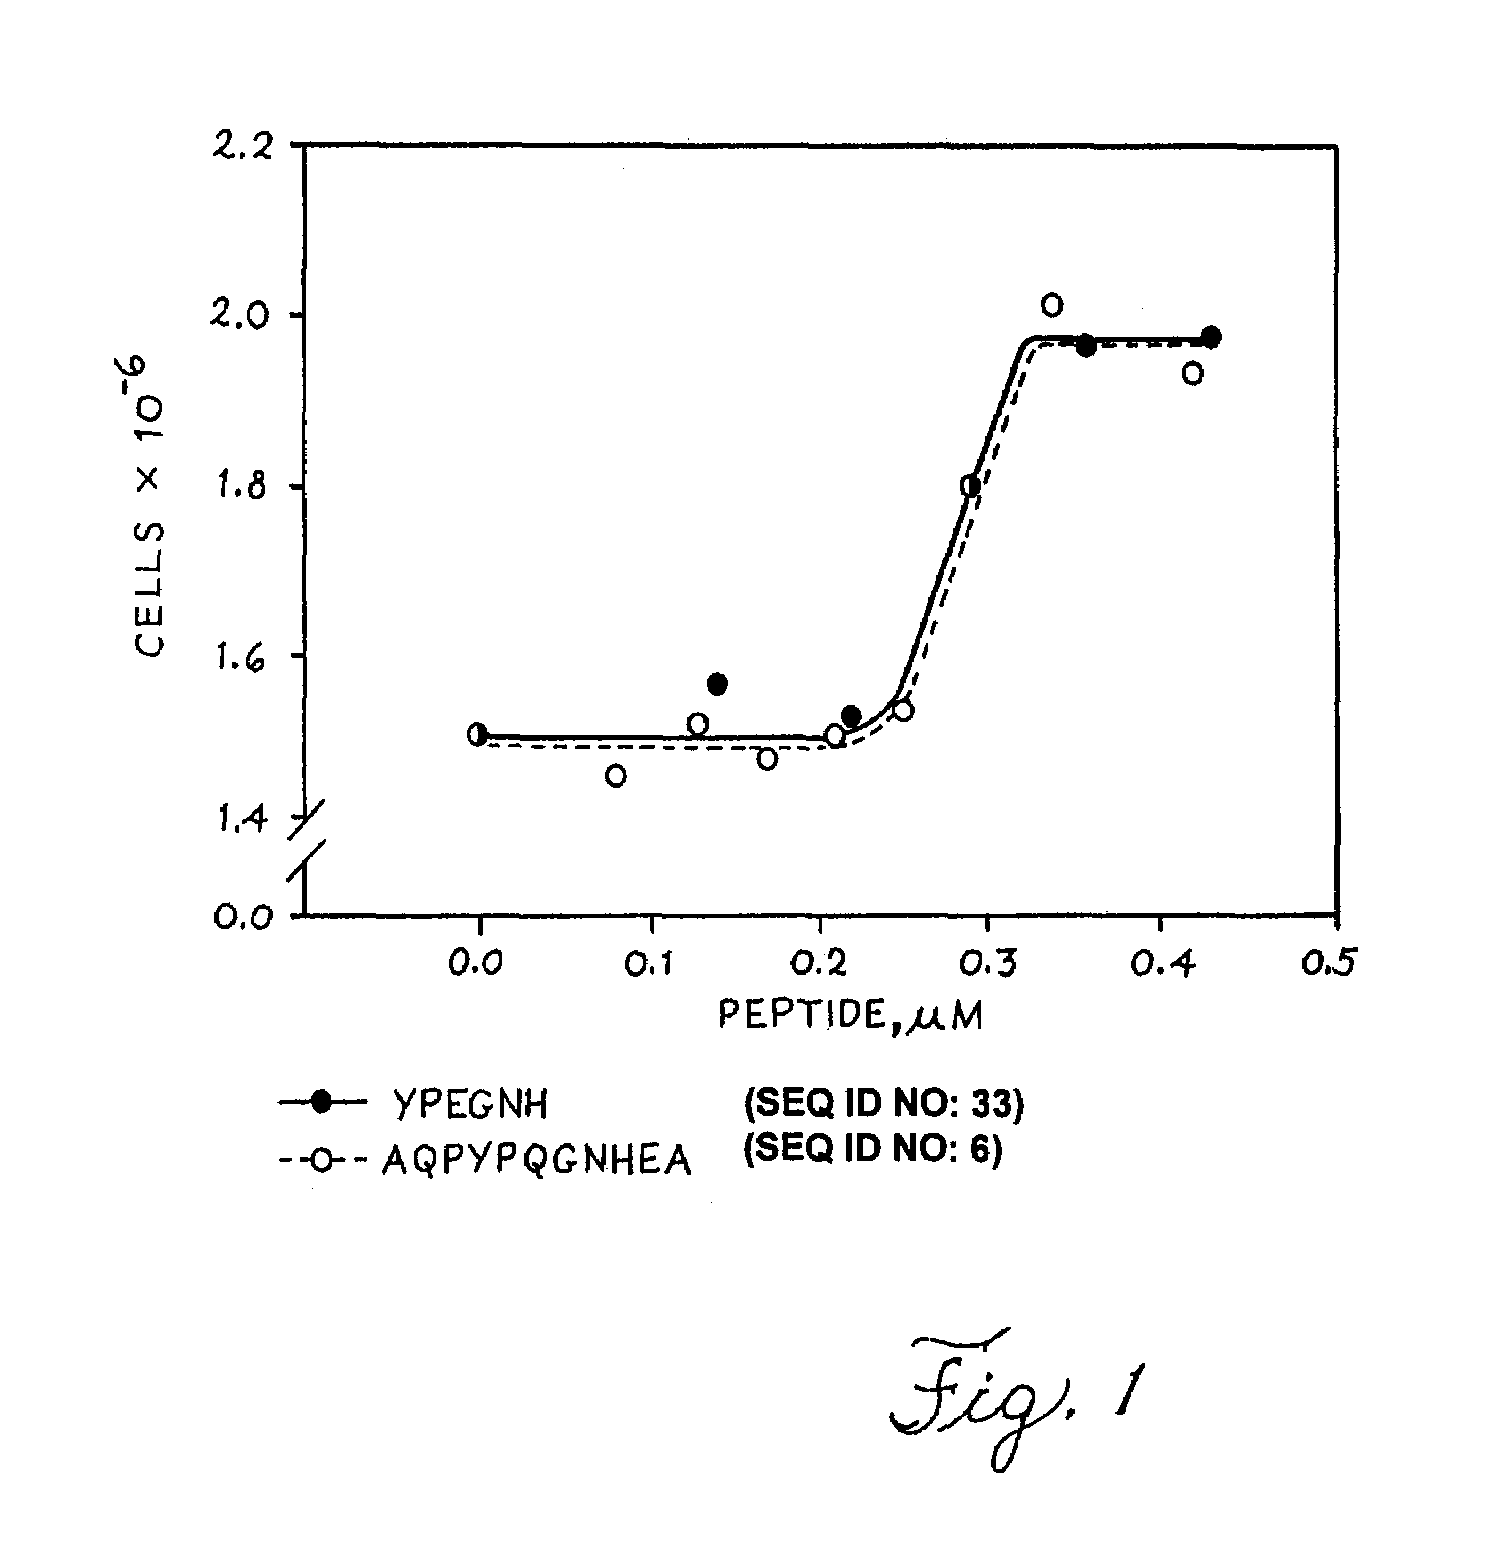 Methods for production of growth-promoting proteins and peptides for kidney epithelial cells